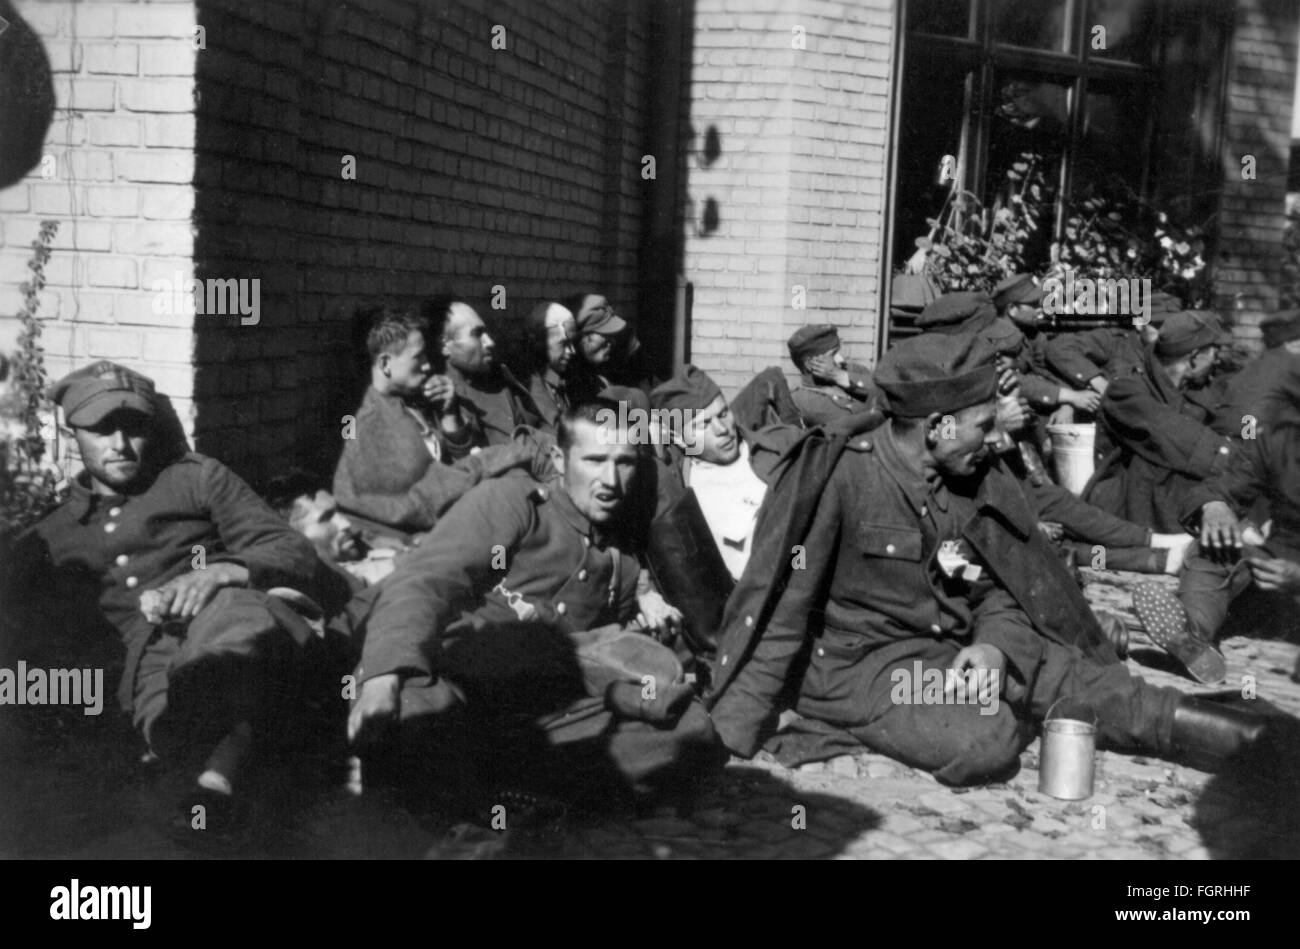 Second World War / WWII, prisoner of war, Polish prisoners waiting on a railway station for their transport / transportation, 1939, Additional-Rights-Clearences-Not Available Stock Photo